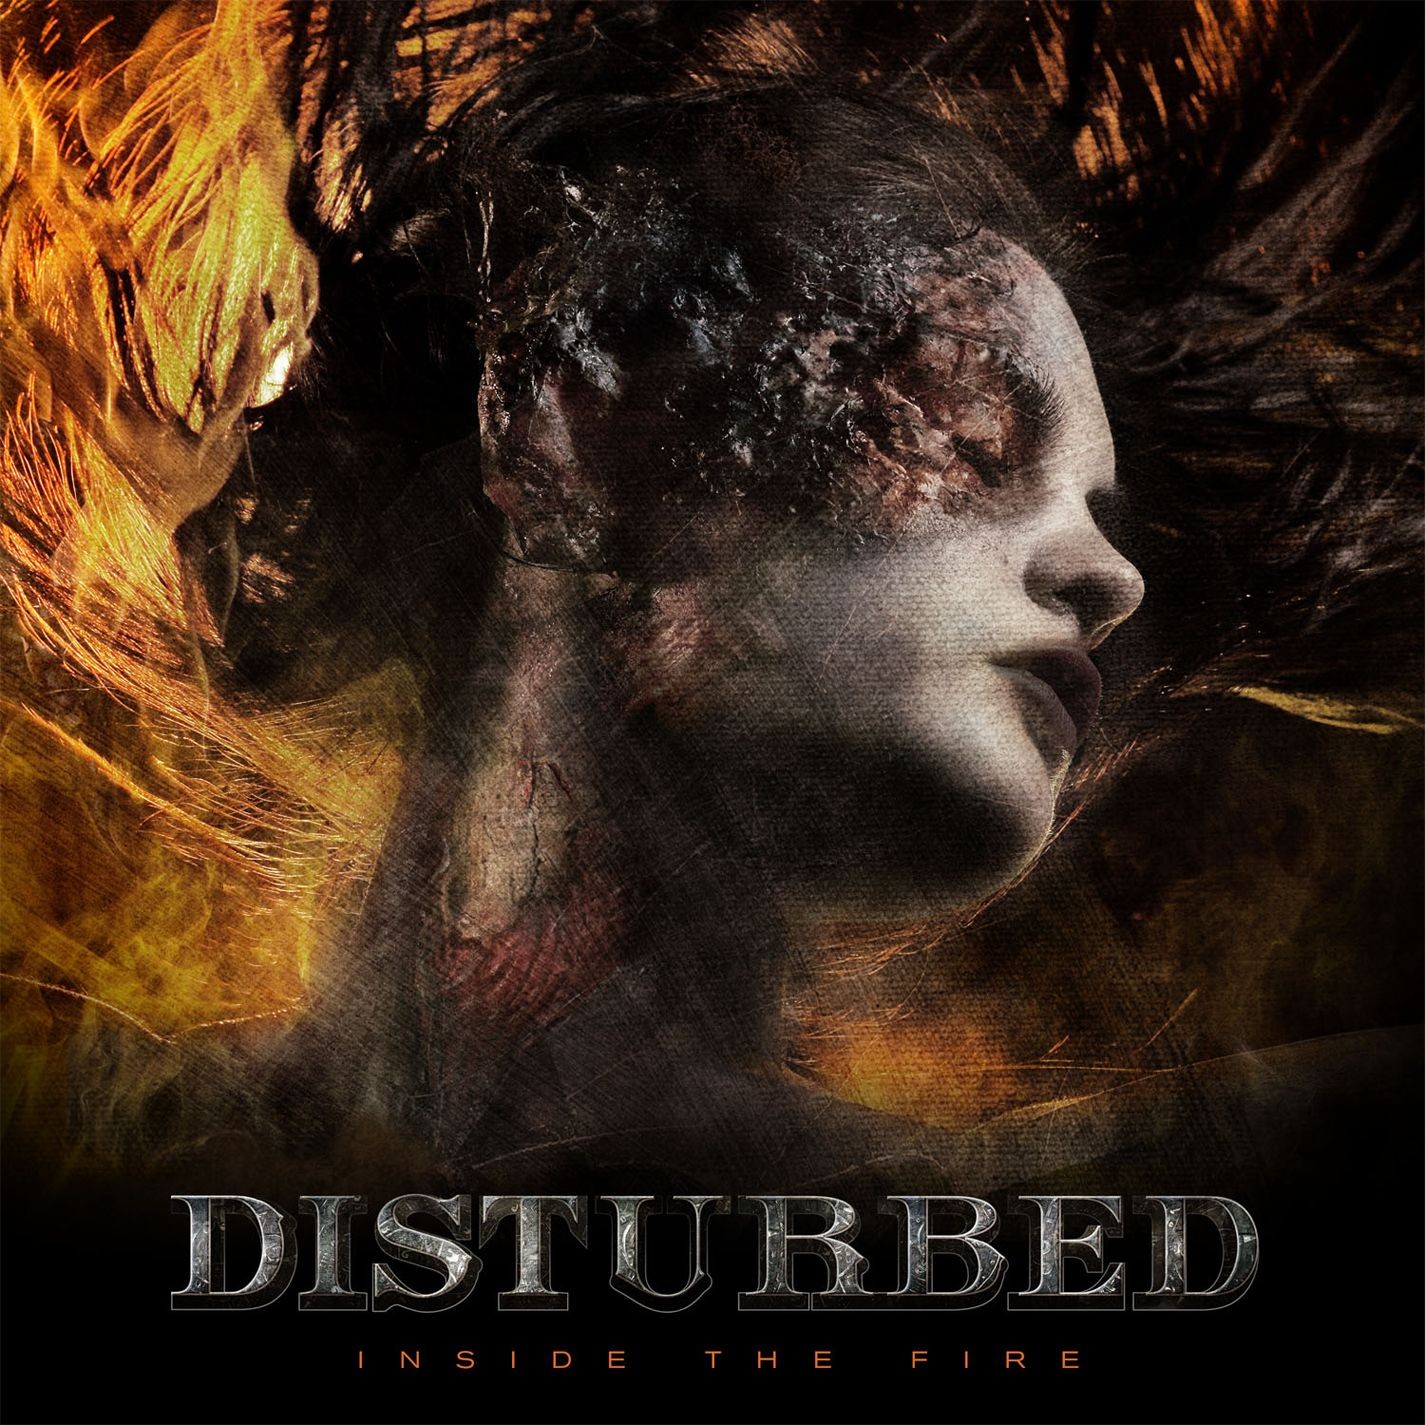 Covers - AllCDCovers_disturbed_inside_the_fire_2008_retail_cd-front1.jpg